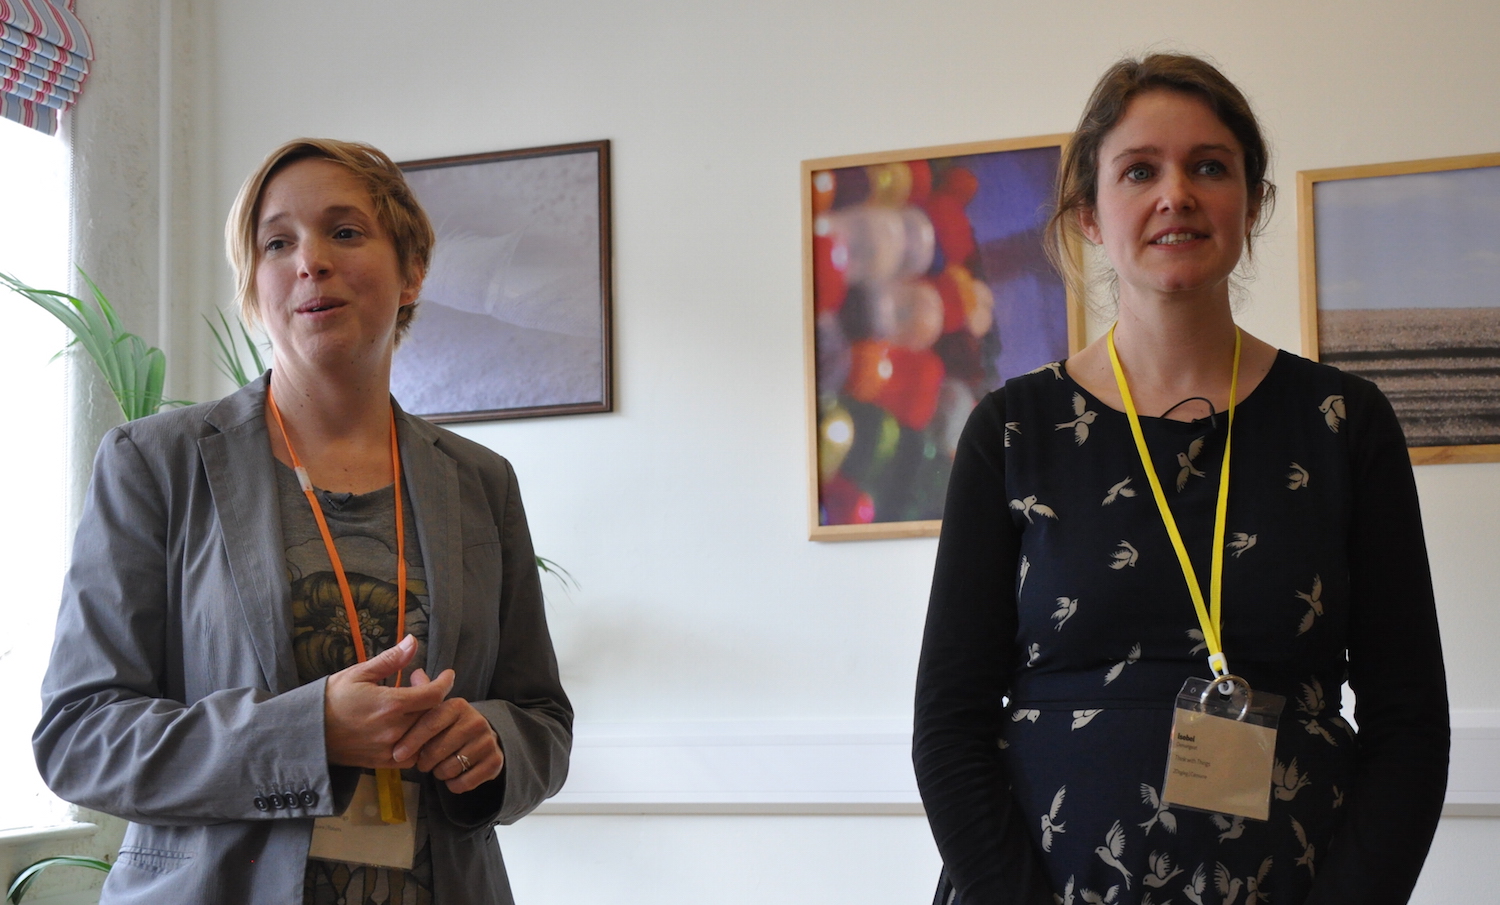 Isobel Demangeat (right) and Julie Anne Gilleland (left) of Think with Things